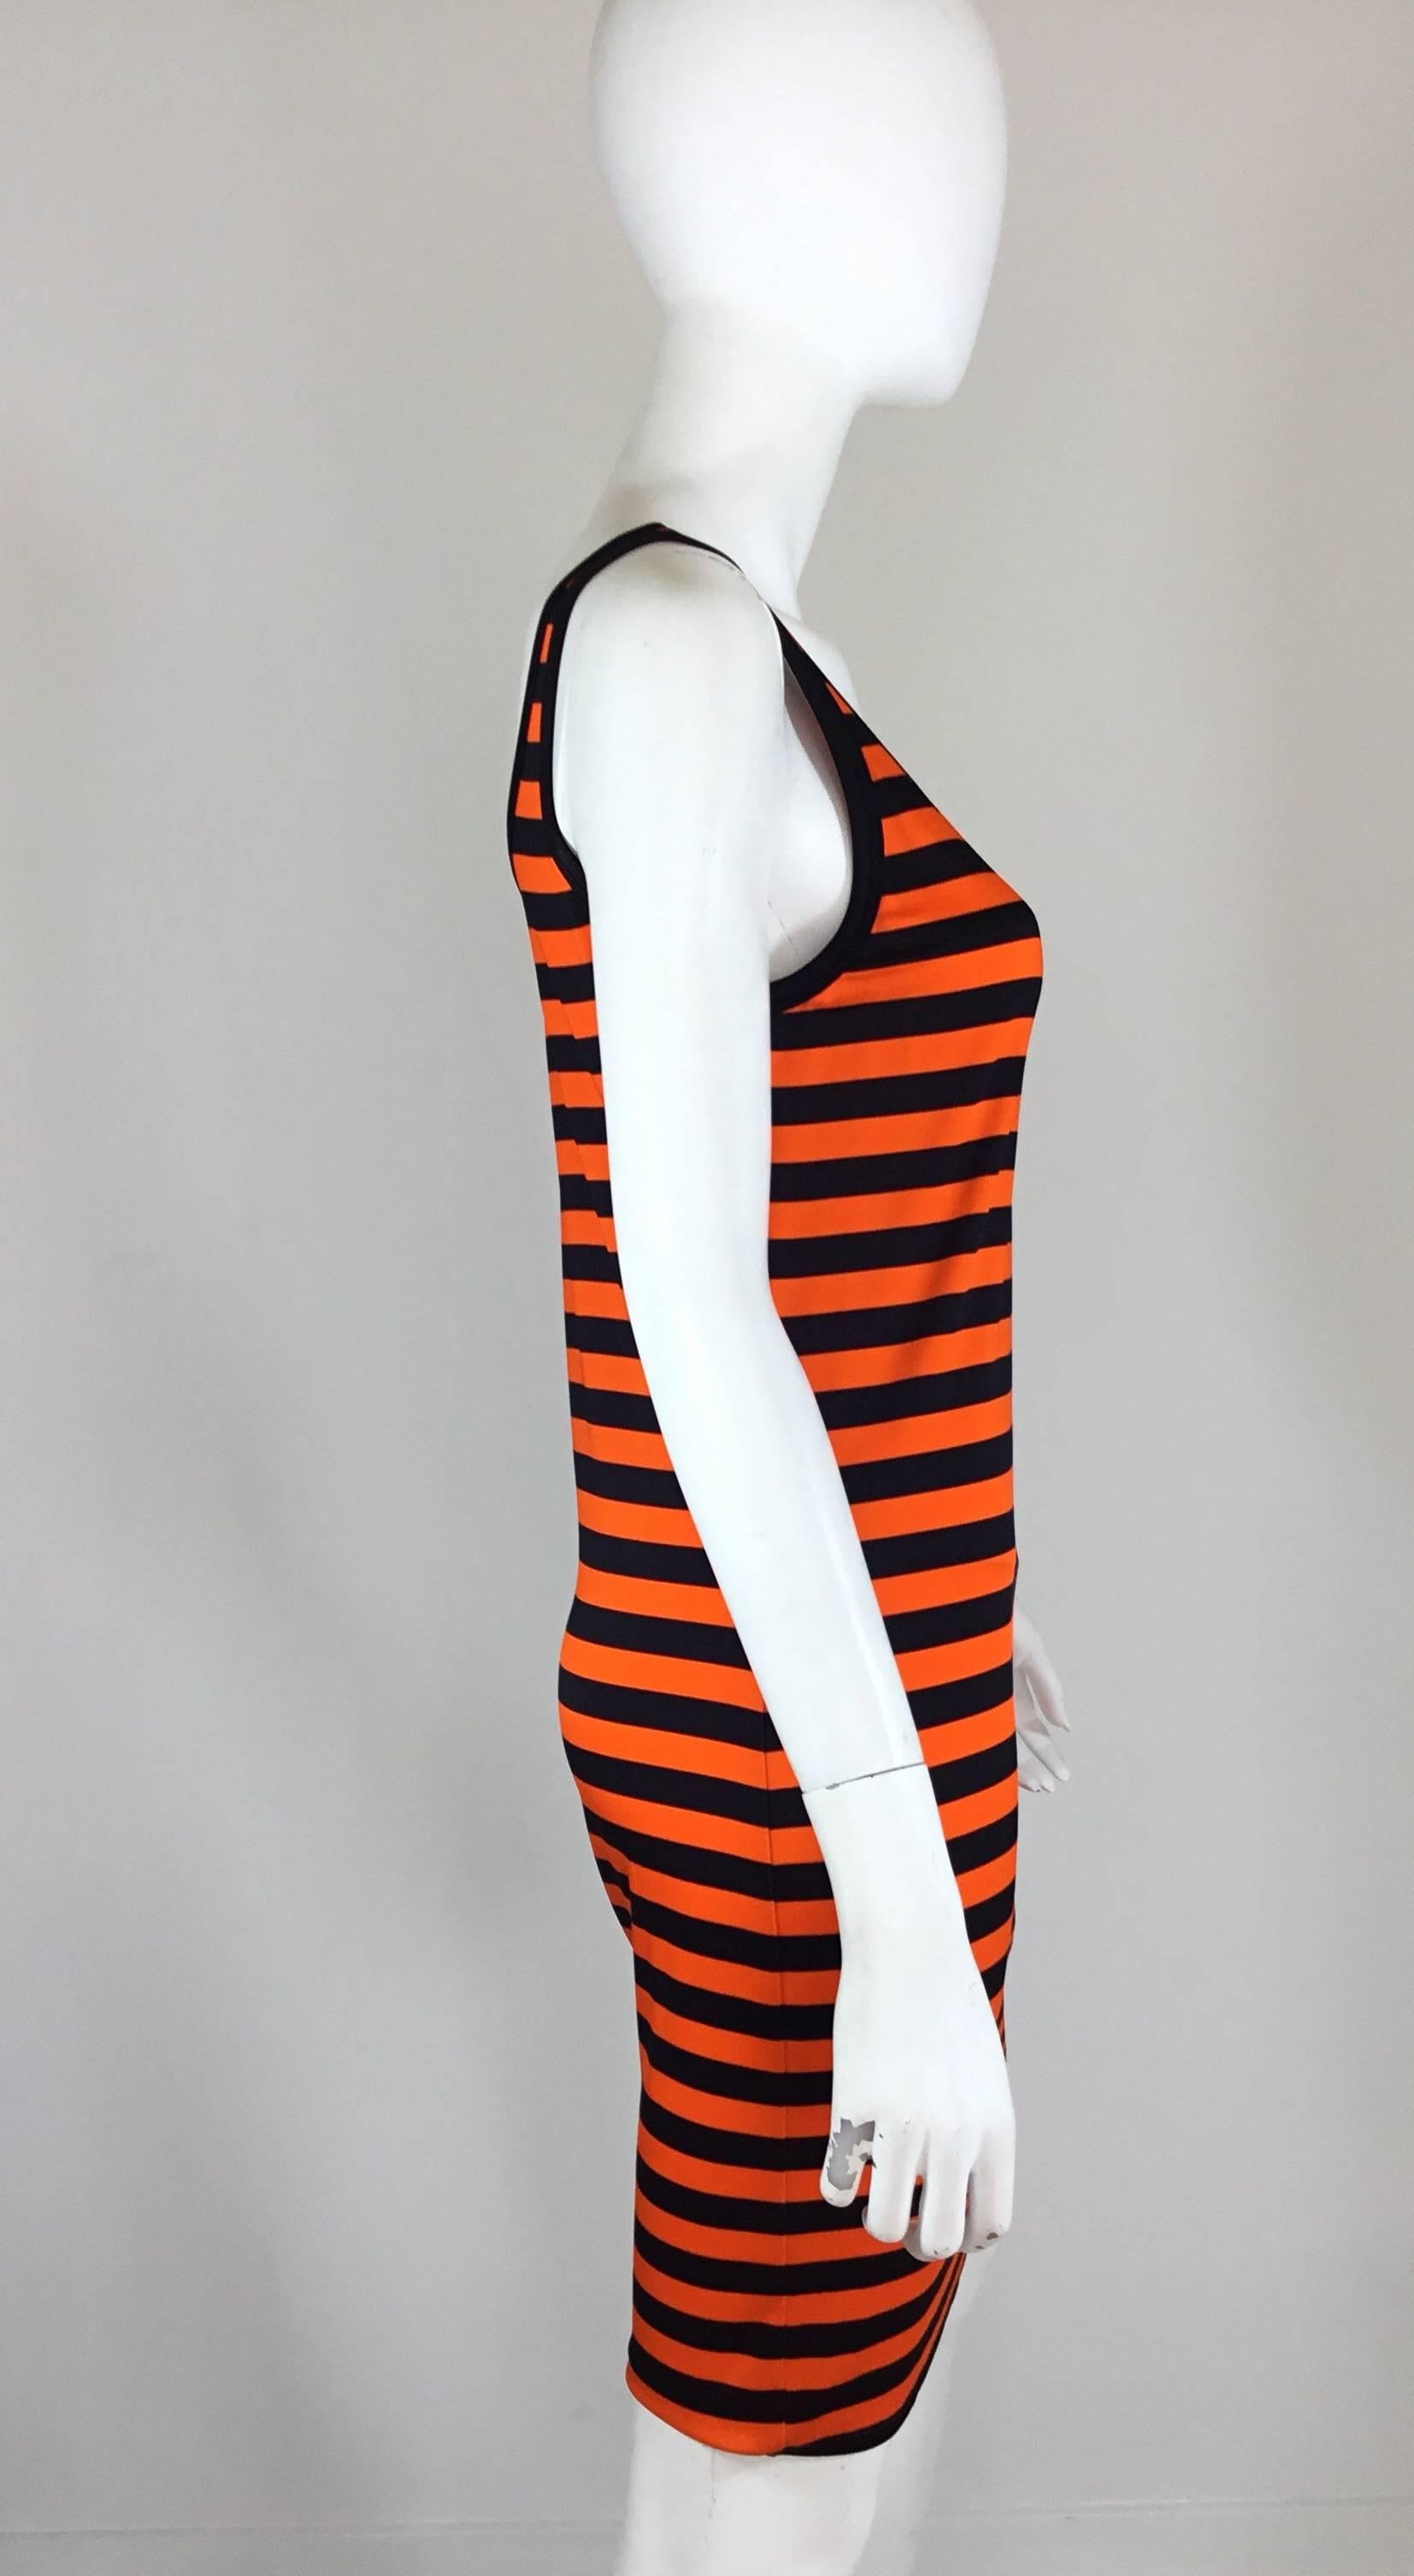 Givenchy striped dress in orange and black, labeled size 42, made in Italy. From 2017. Excellent Condition.

Measurements: Garment has stretch
bust 34'', waist 34'', hips 36'', length 30''